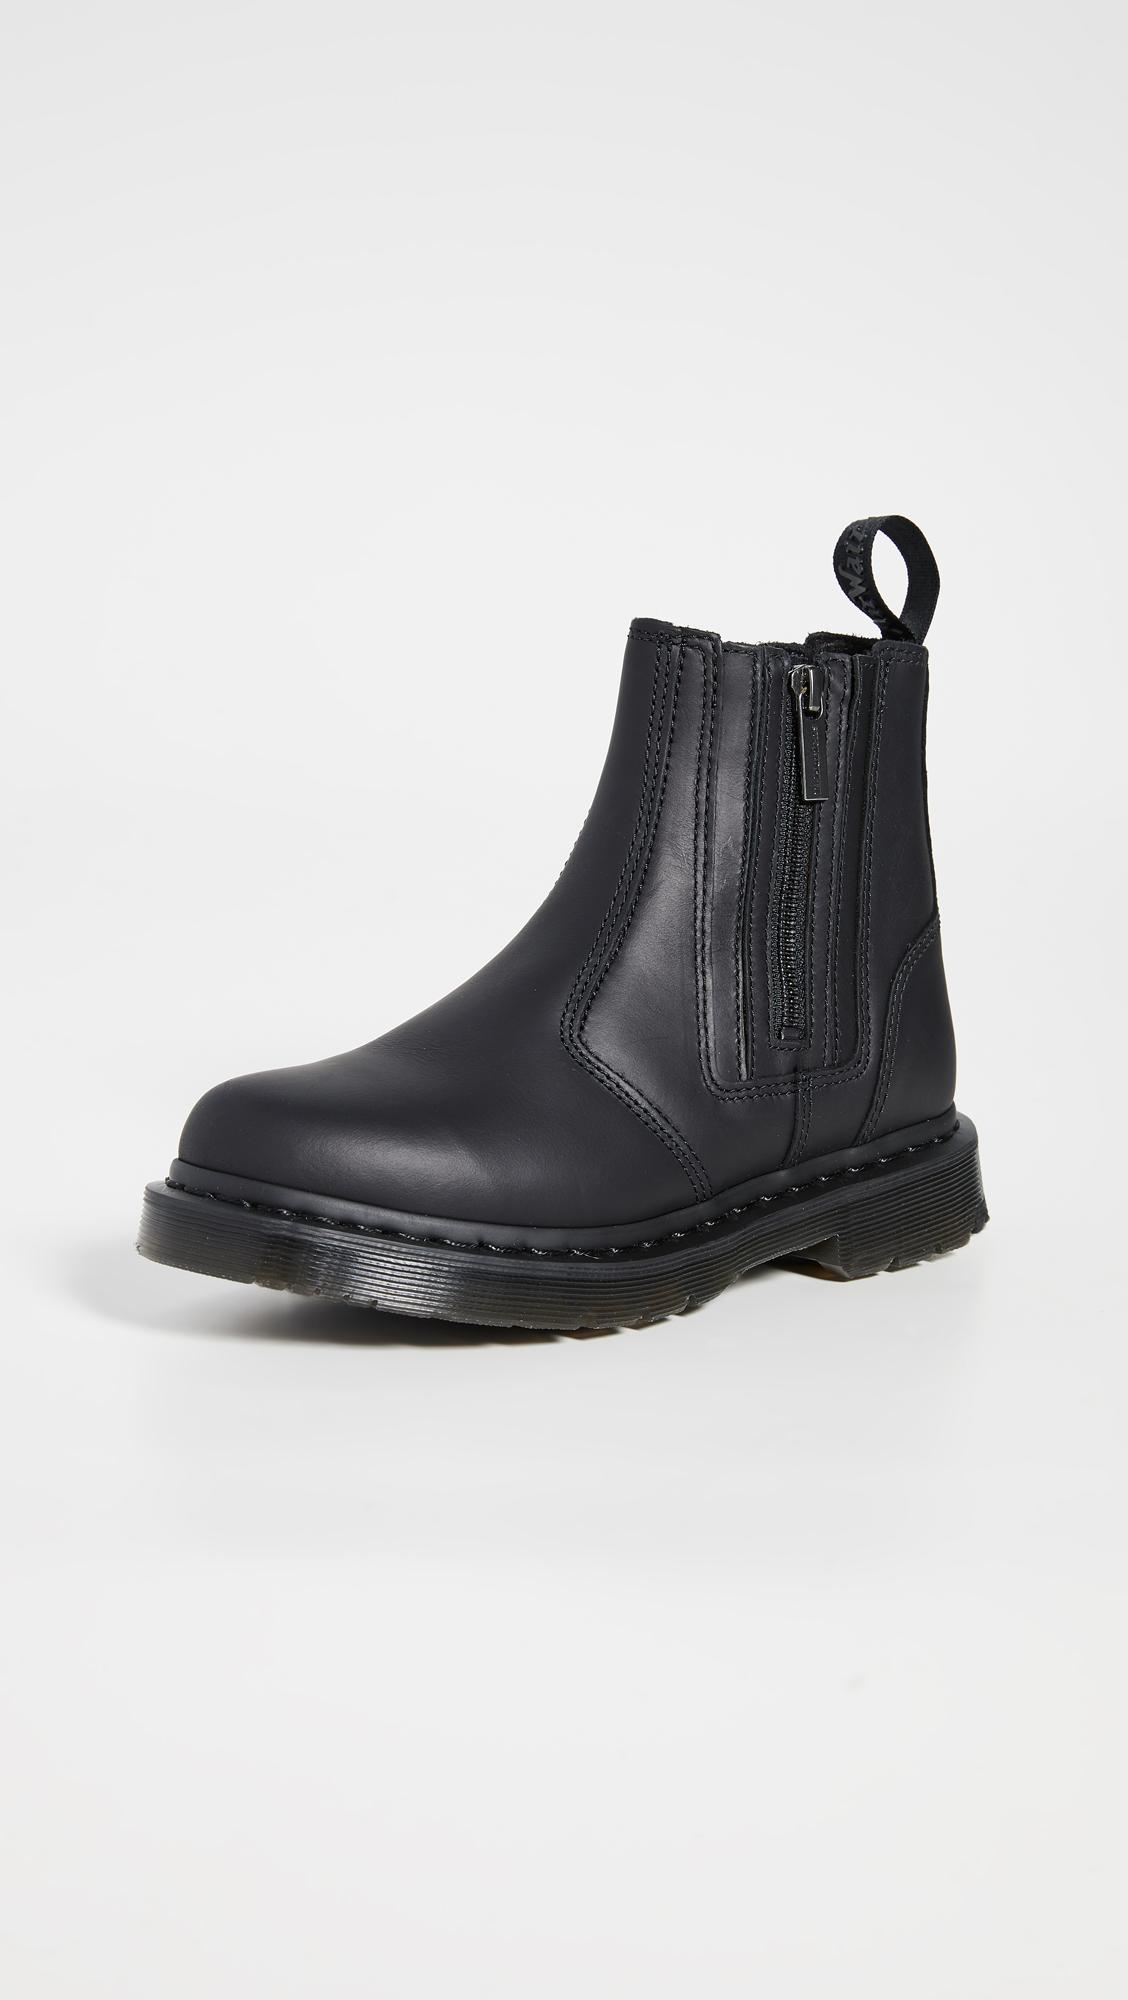 Dr. Martens Leather 2976 Alyson Chelsea Boots With Zips in Black/Black ( Black) | Lyst